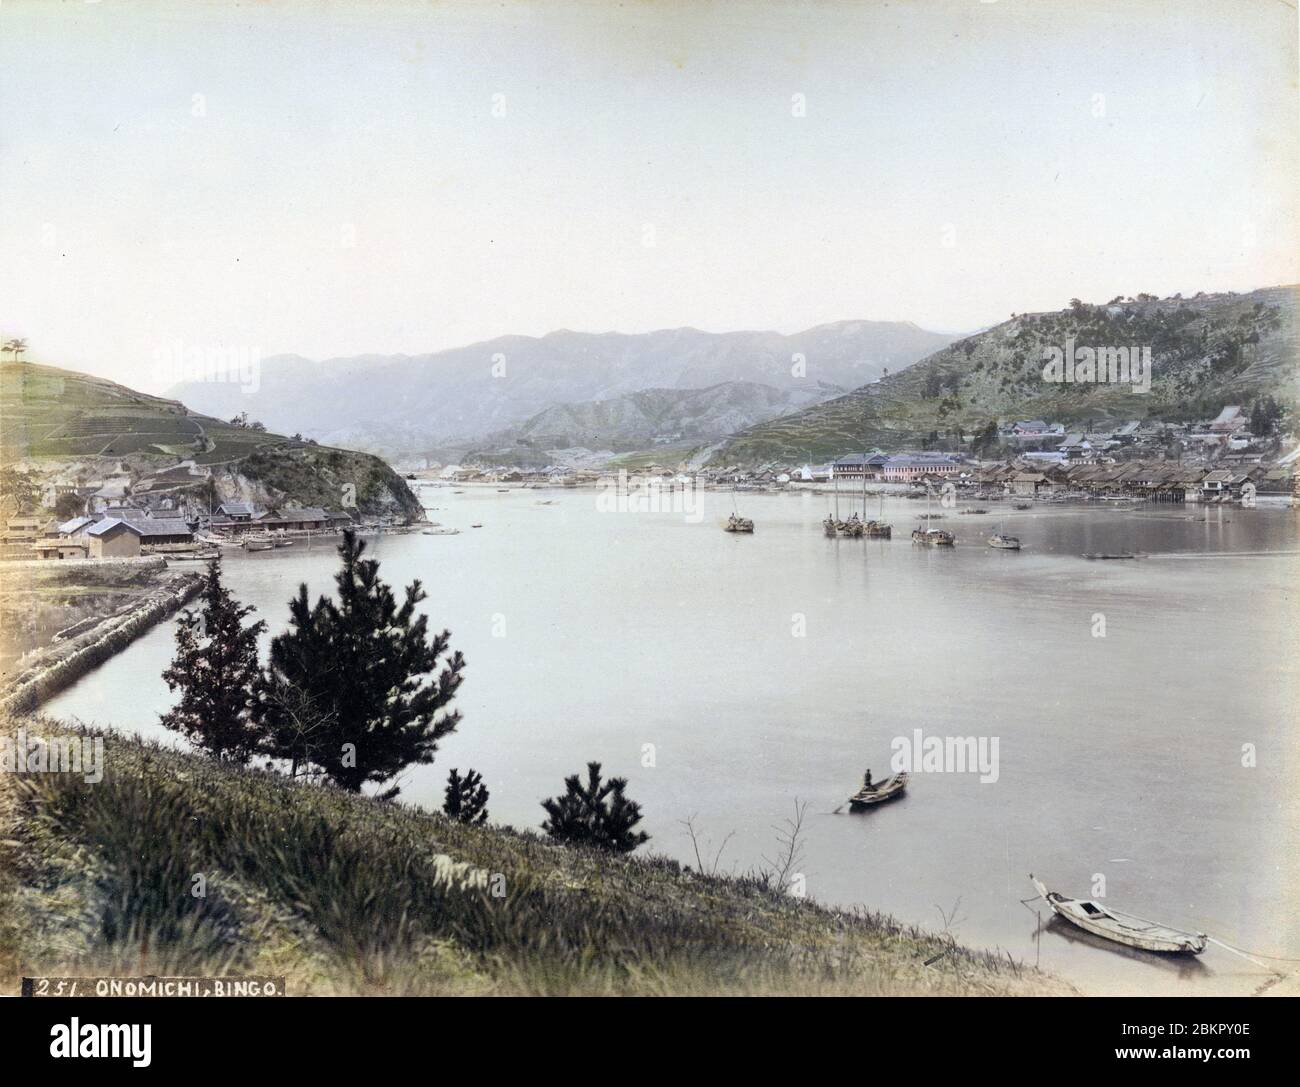 [ 1890s Japan - View on Onomichi ] —   Panoramic view of Onomichi and the Seto Inland Sea in Hiroshima Prefecture. The town was an important port for the transportation of goods.  19th century vintage albumen photograph. Stock Photo